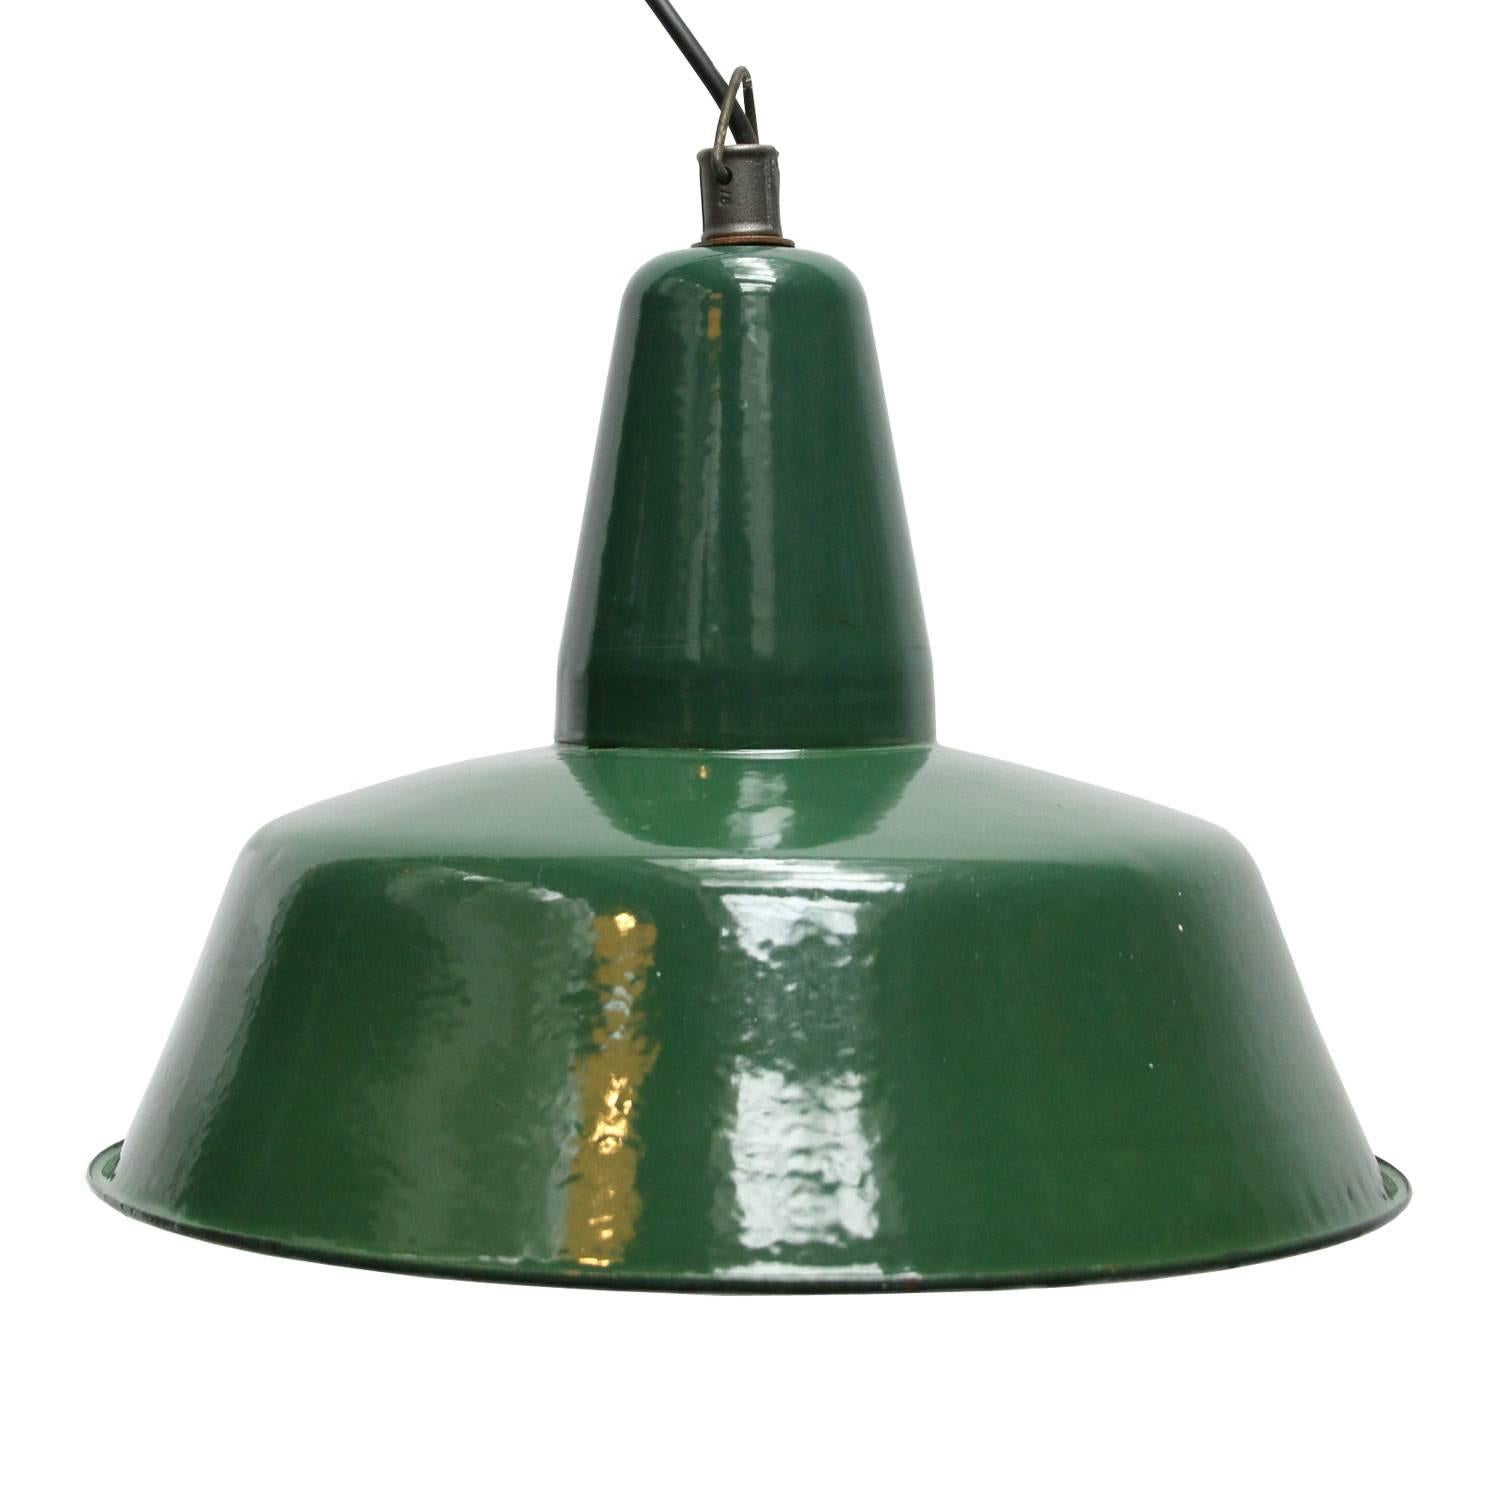 Green enamel industrial pendant. White interior.

Weight: 2.0 kg / 4.4 lb

Priced per individual item. All lamps have been made suitable by international standards for incandescent light bulbs, energy-efficient and LED bulbs. E26/E27 bulb holders